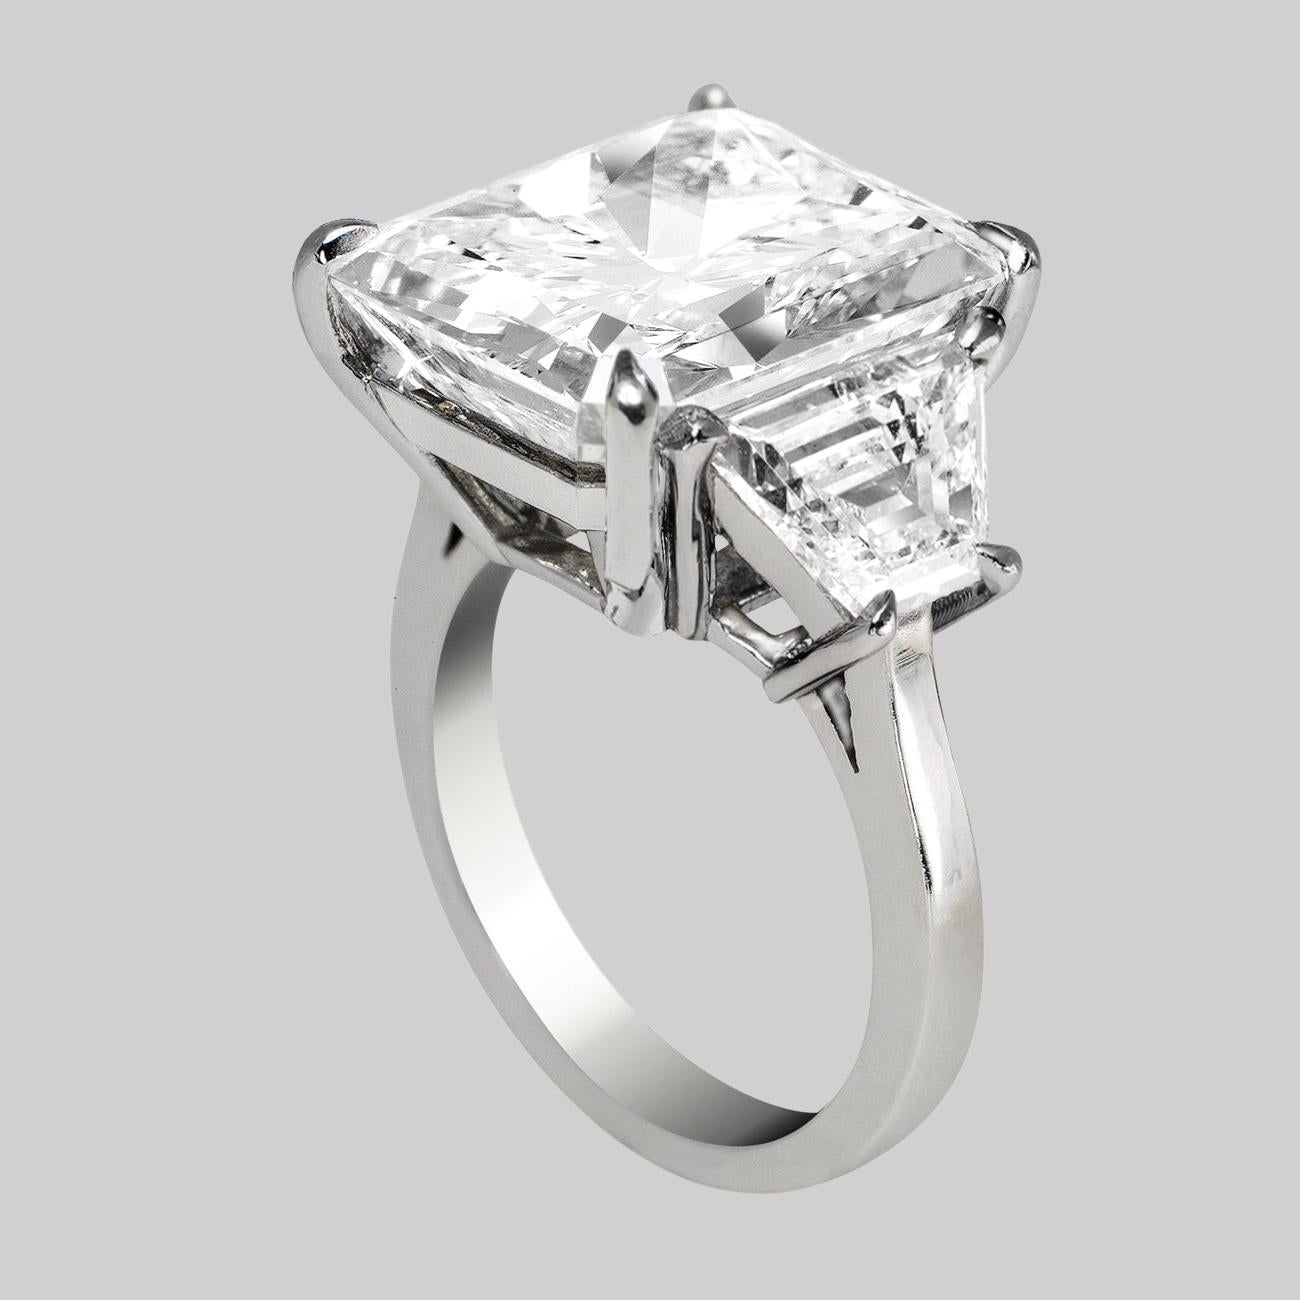 An exquisite GIA certified 8 carat radiant cut diamond set in solid platinum 
the diamond is extremely shiny with excellent proportions
the ring has been handmade in Italy